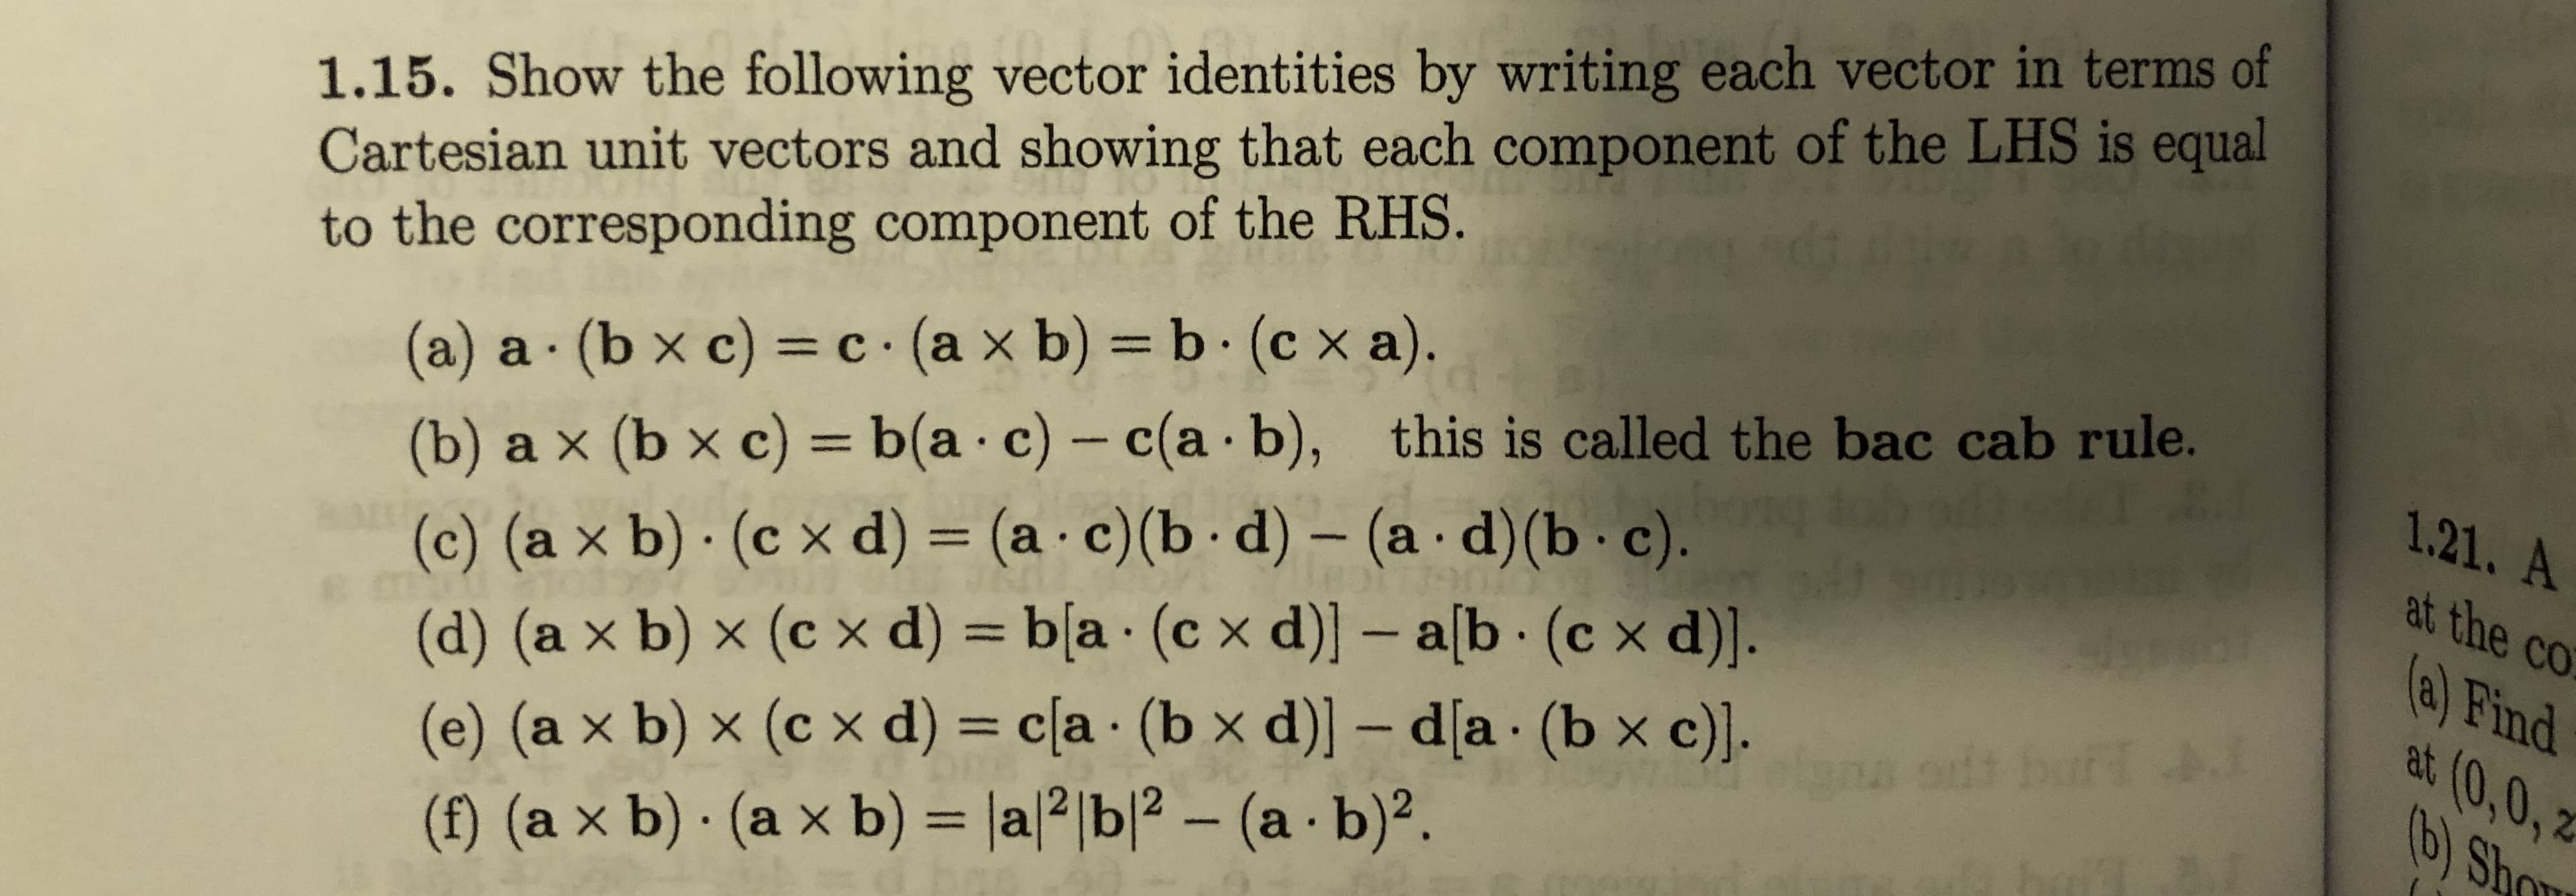 1.15. Show the following vector identities by writing each vector in terms of
Cartesian unit vectors and showing that each component of the LHS is equal
to the corresponding component of the RHS.
(a) a (b x c) = c (a x b) = b (c x a).
(b) a x (b x c) = b(a·c) - c(a b), this is called the bac cab rule.
(c) (a x b) · (c x d) = (a · c)(b · d) – (a·d)(b· c).
(d) (a x b) × (c x d) = b[a · (c x d)] – a[b (c x d)].
(e) (a x b) × (c x d) = c[a · (b x d)] – d[a (b x c)].
(f) (a x b) · (a x b) = |al2|b|? – (a - b)².
%3D
1.21. A
at the co
%3D
(a) Find
at (0,0, 2
b) Sho
%3D
